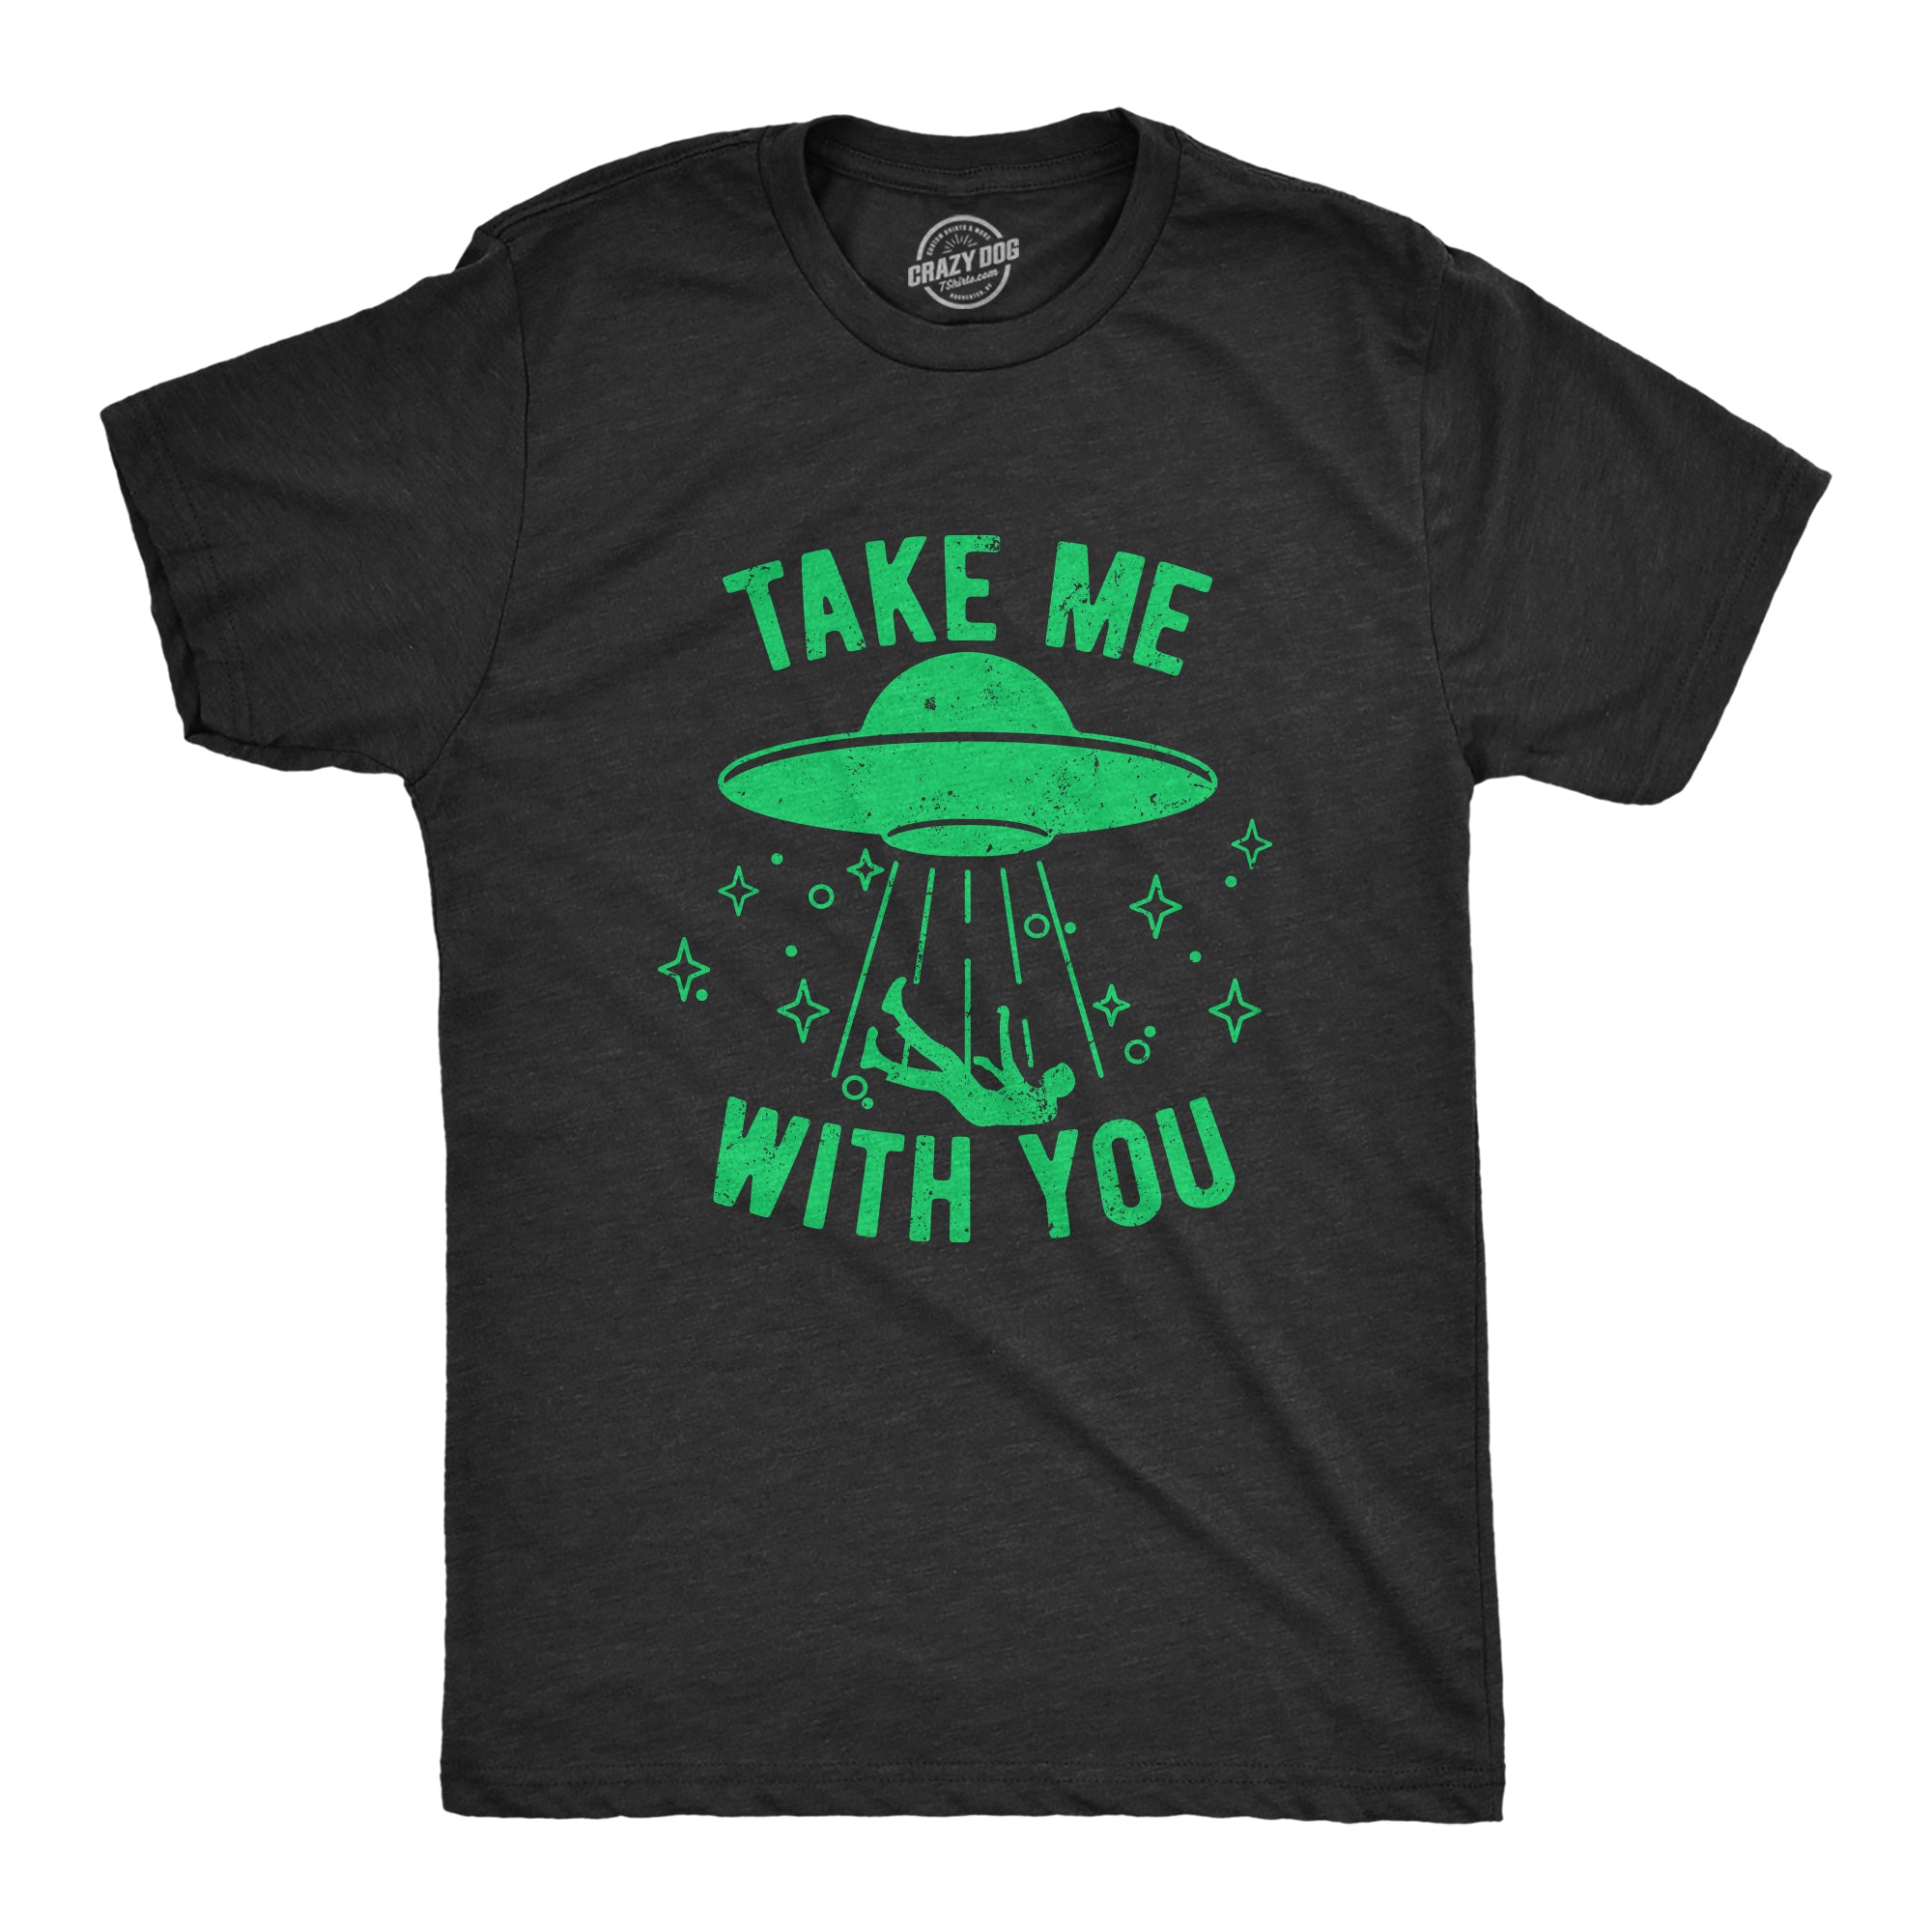 Funny Heather Black - TAKE Take Me With You Mens T Shirt Nerdy Sarcastic Tee